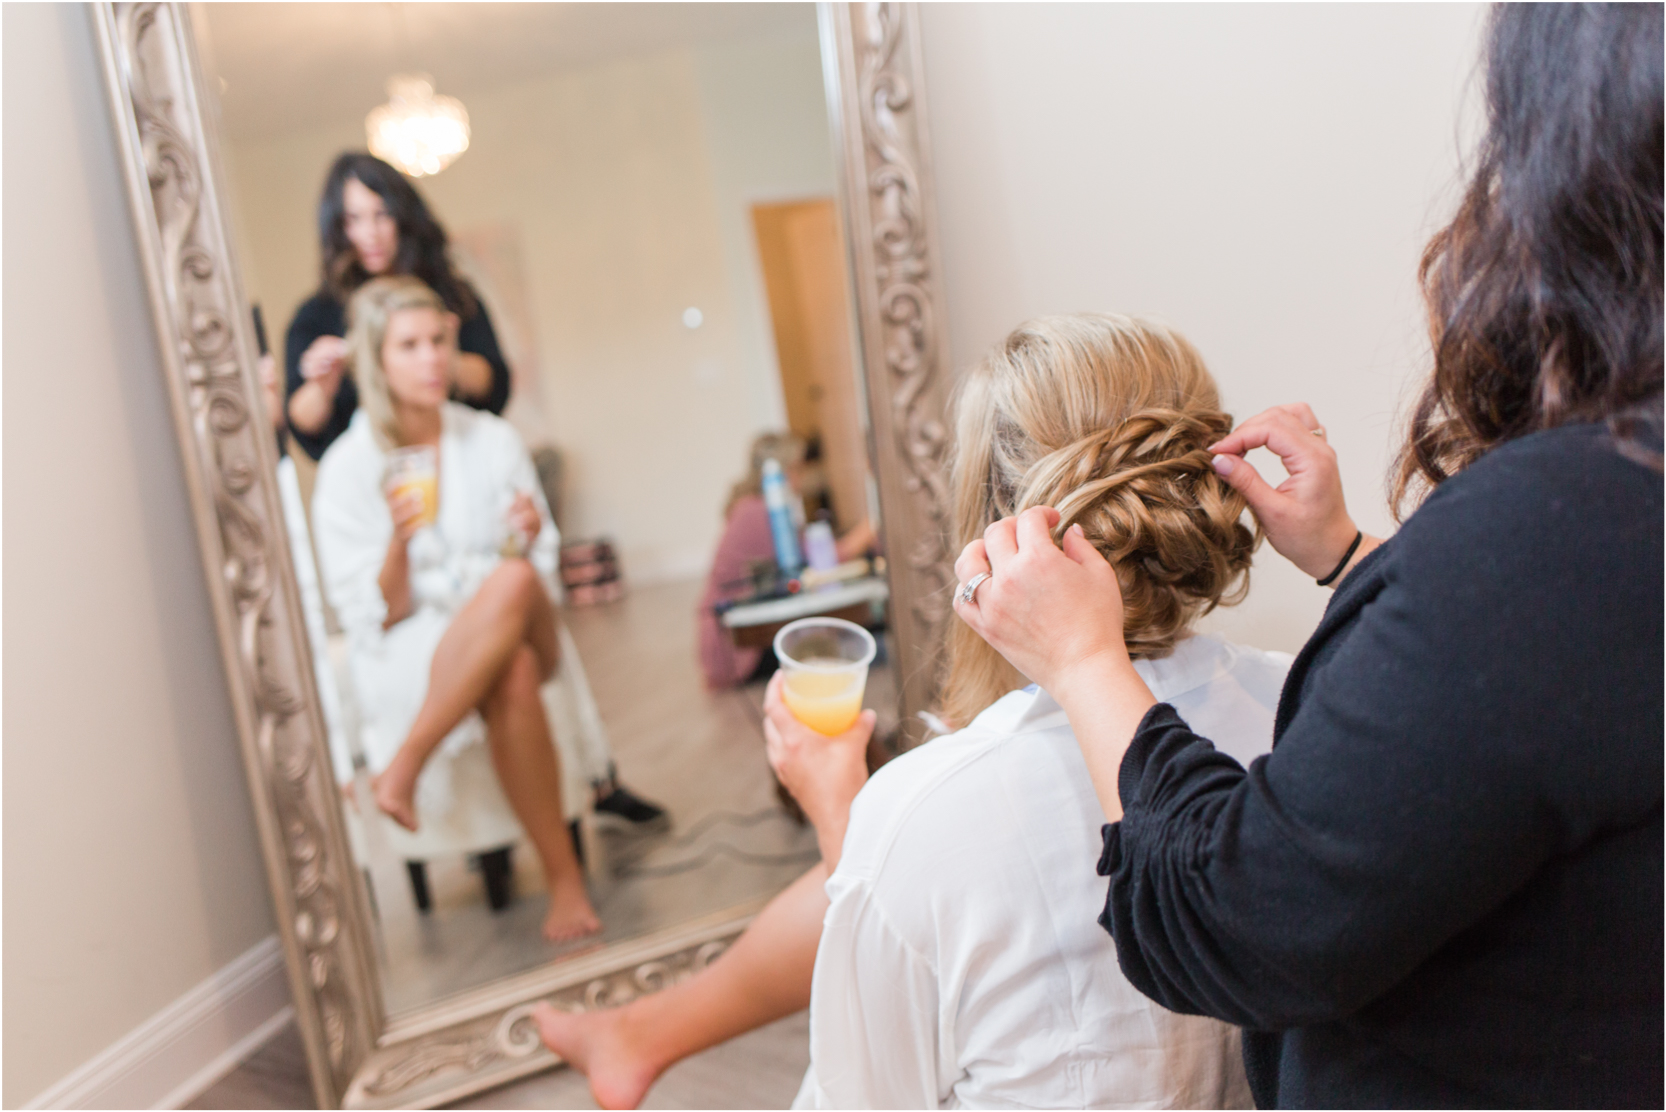 Tuckers Gap Tennessee Bride Getting Ready Wedding Photography